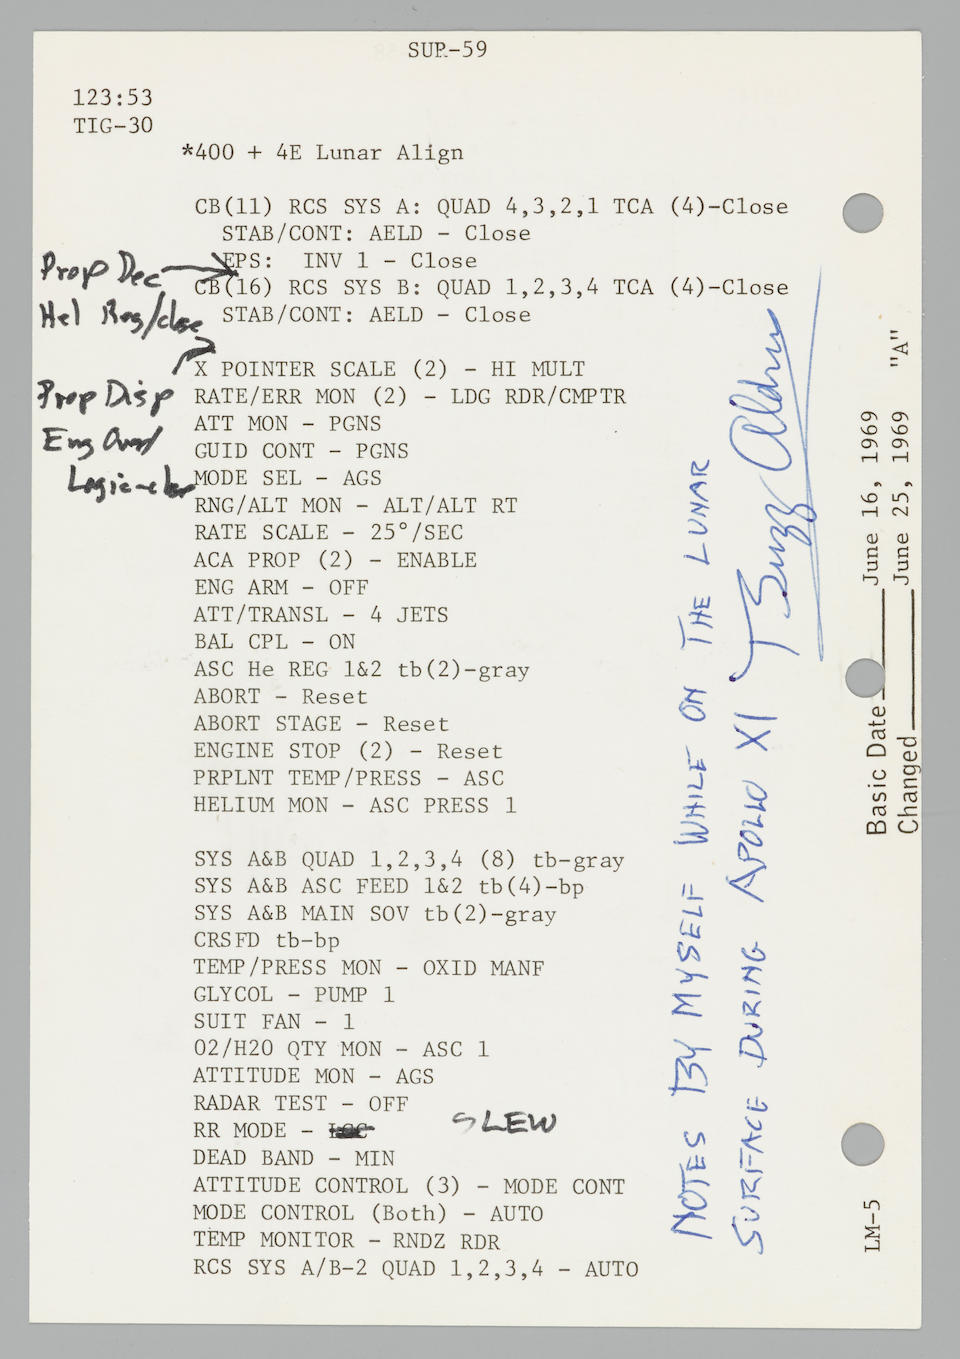 FLOWN APOLLO 11 LUNAR SURFACE CHECKLIST SHEET HAVING ONE OF THE MOST EXTENSIVE SETS OF NOTATIONS MADE WHILE ON THE MOON.  BOTH SIDES HAVE CRITICAL DATA RECORDED ON THE MOON TO ENABLE ARMSTRONG AND ALDRIN TO LEAVE THE LUNAR SURFACE.